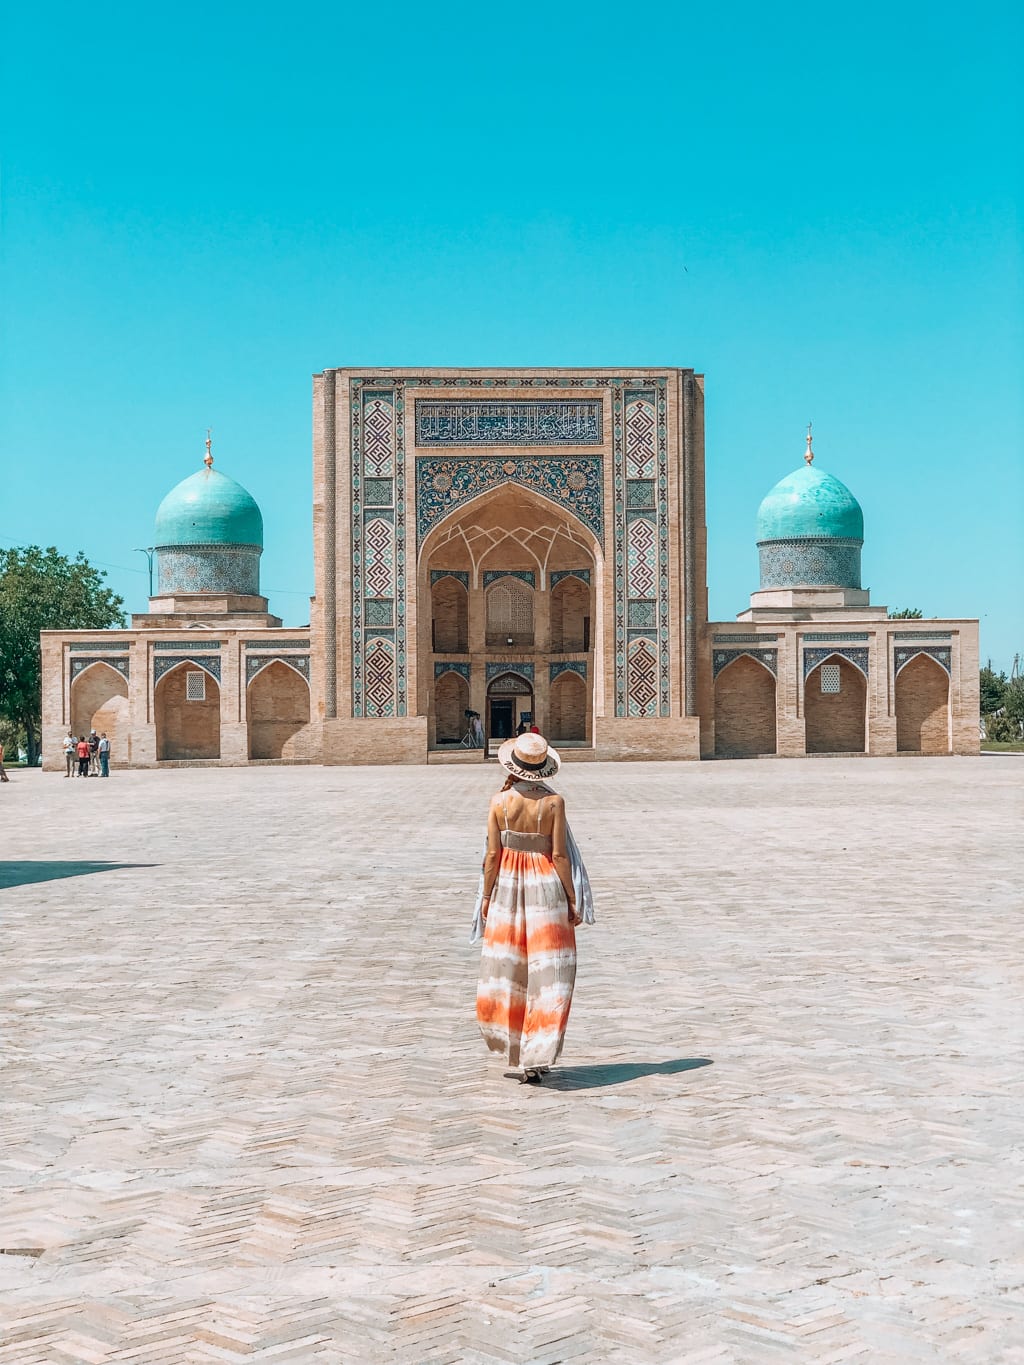 What to see in Tashkent, the capital of Uzbekistan